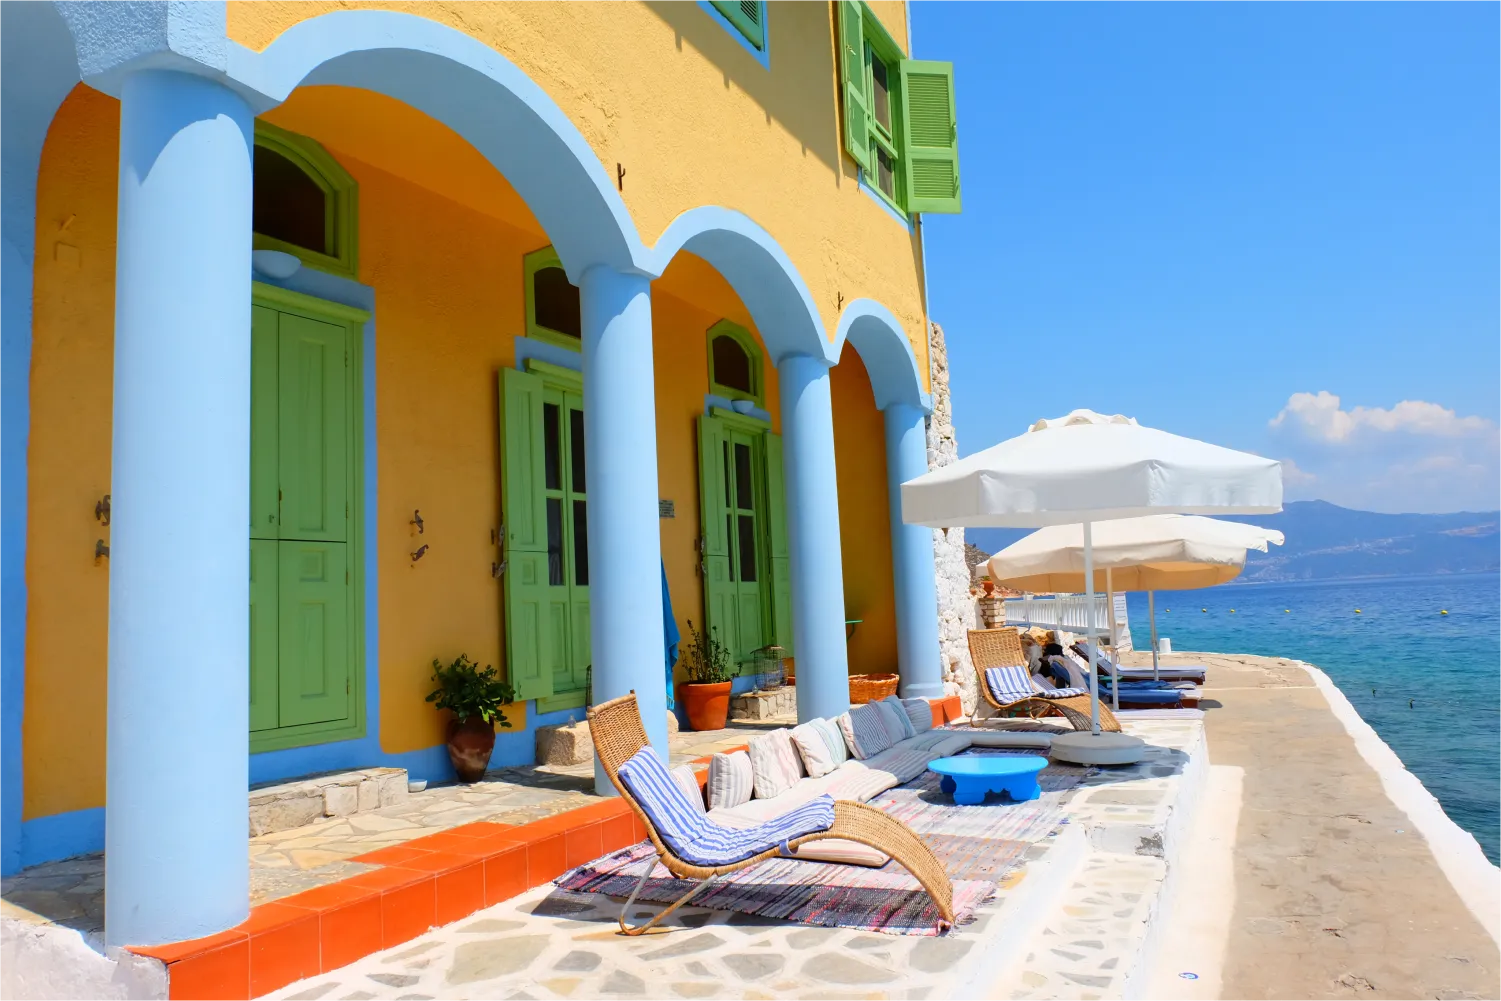 Sunbeds in front of colorful building overlooking the sea in Megisti, Kastelorizo